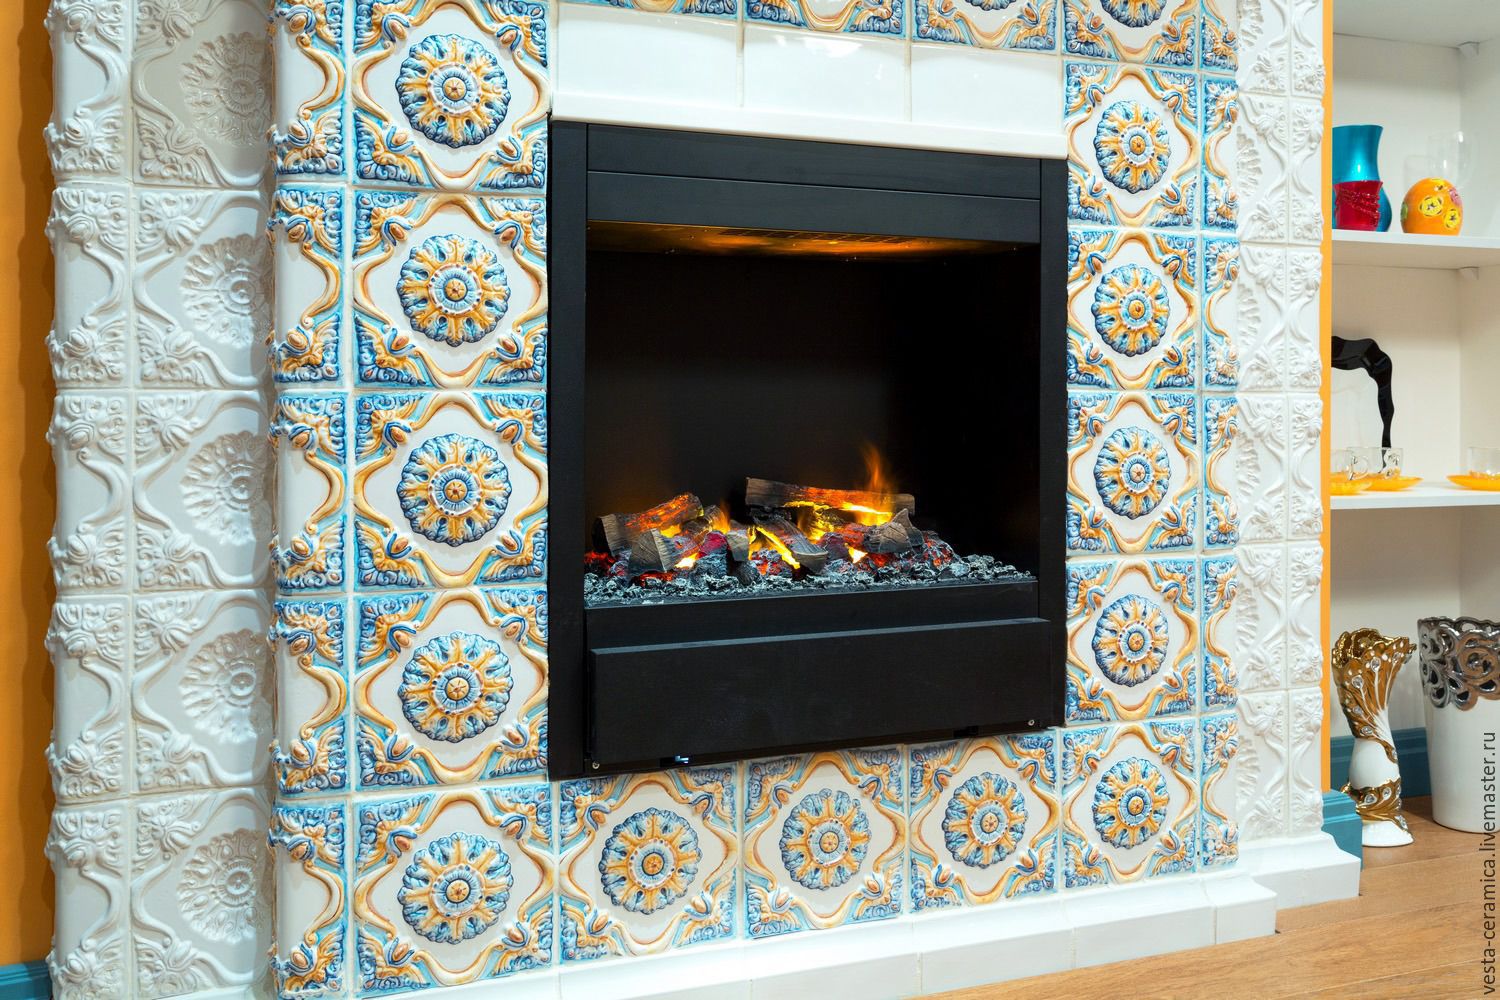 Fireplace Ceramic Tile Awesome Tiled Fireplace